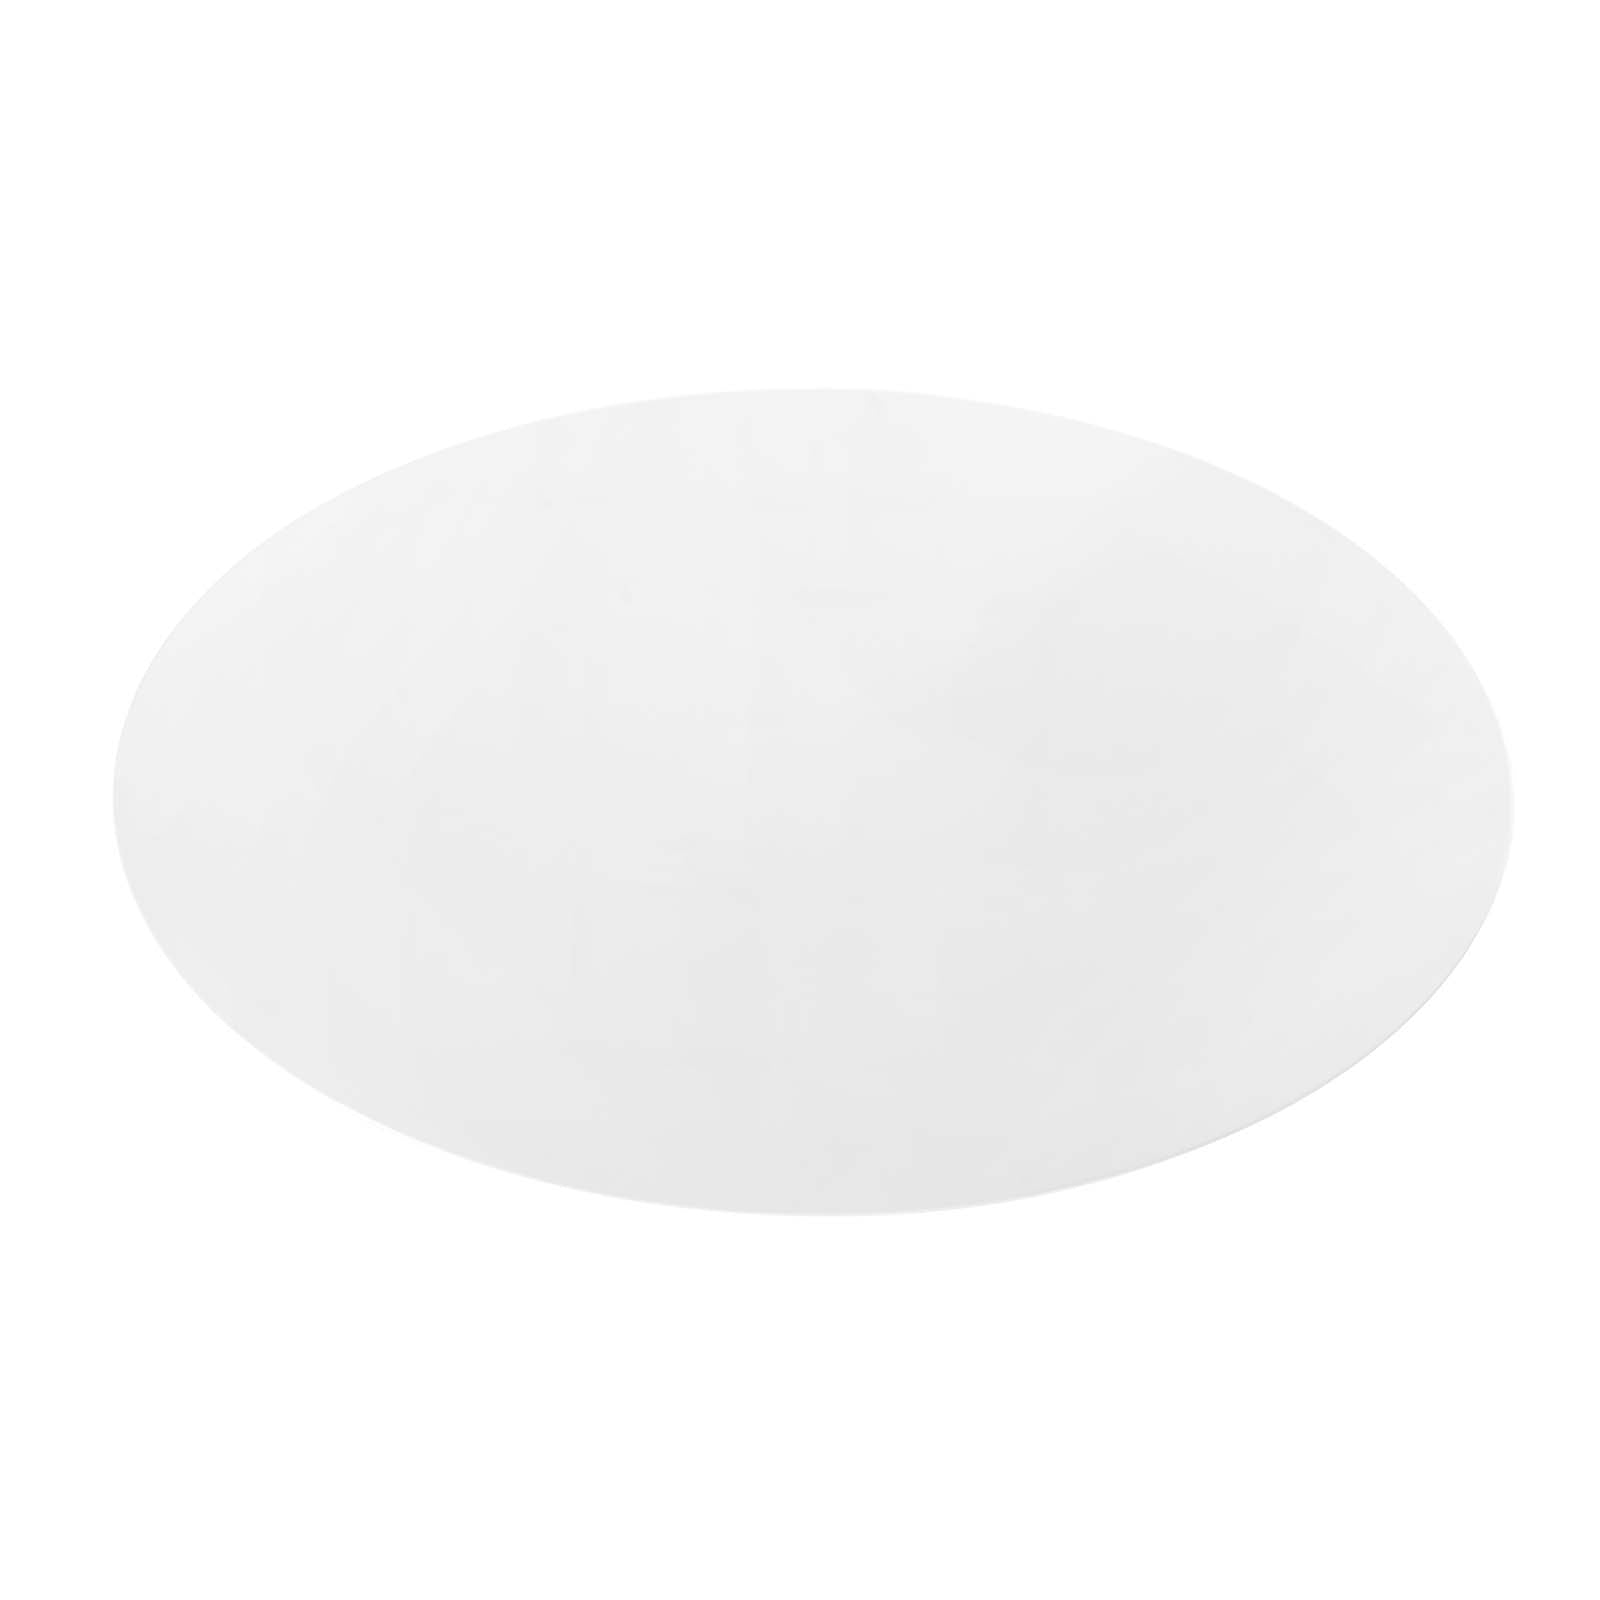 Oval Shiny White Tulip Dining Table